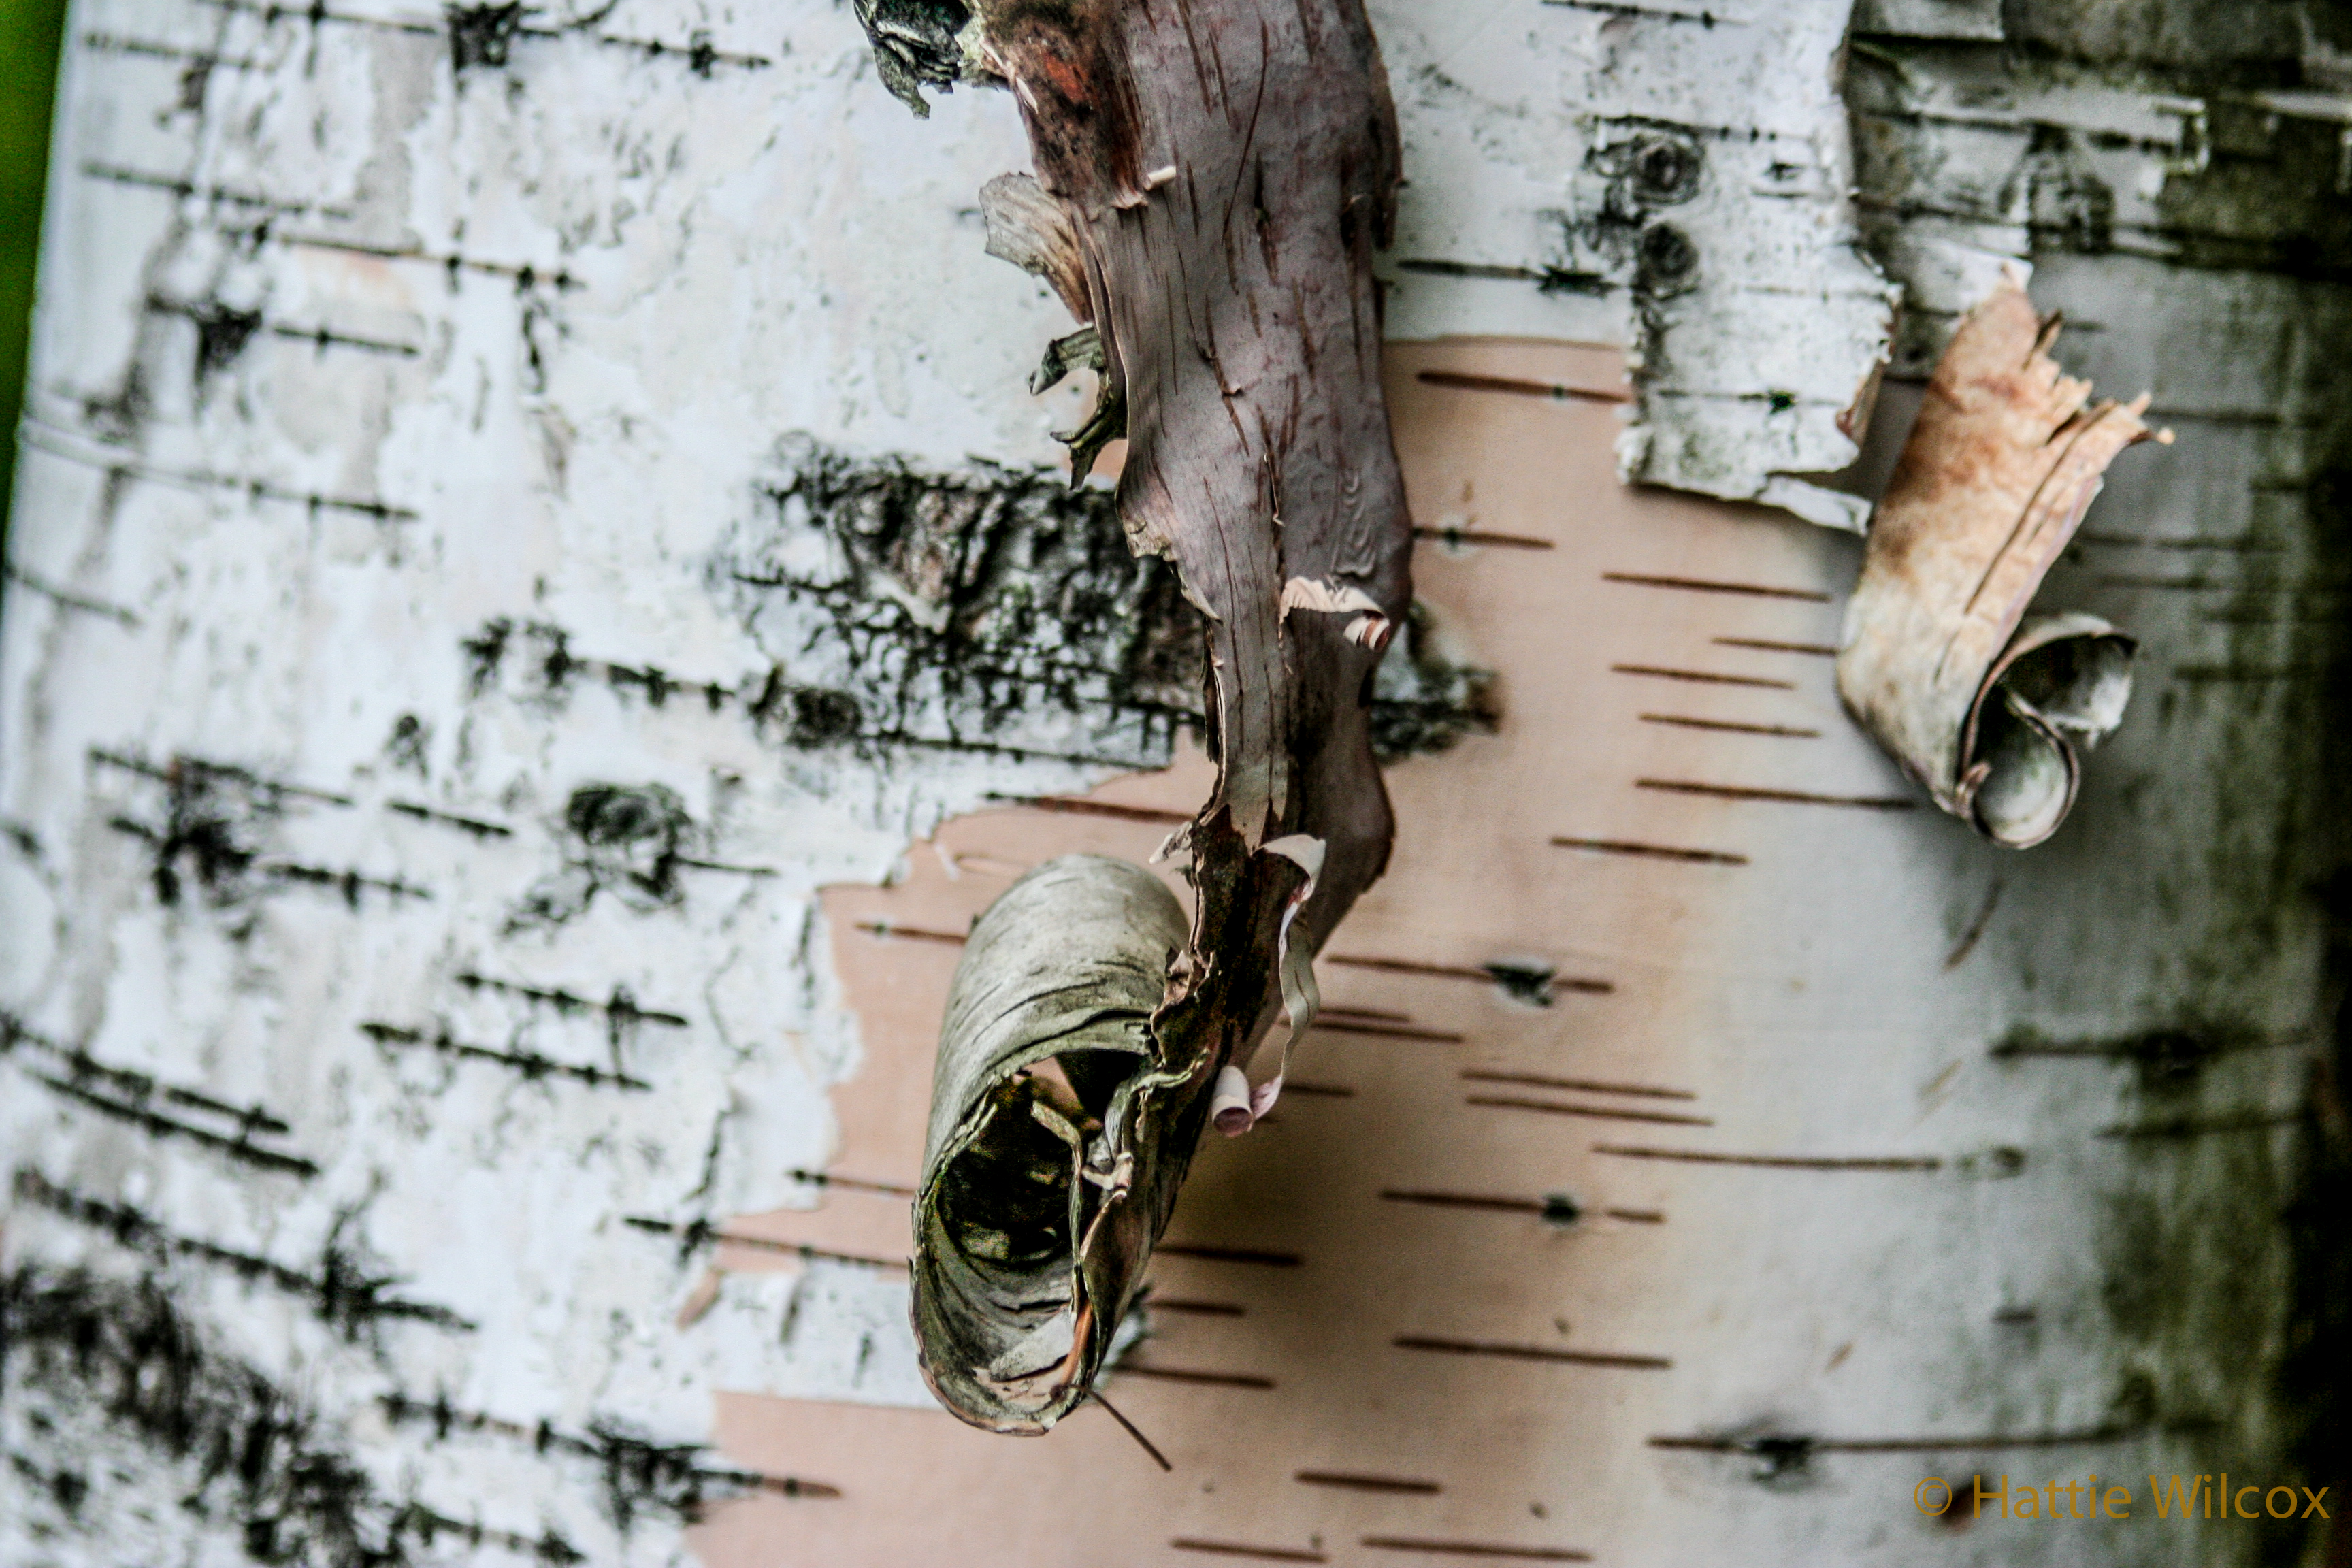 birch bark | Available Light Only